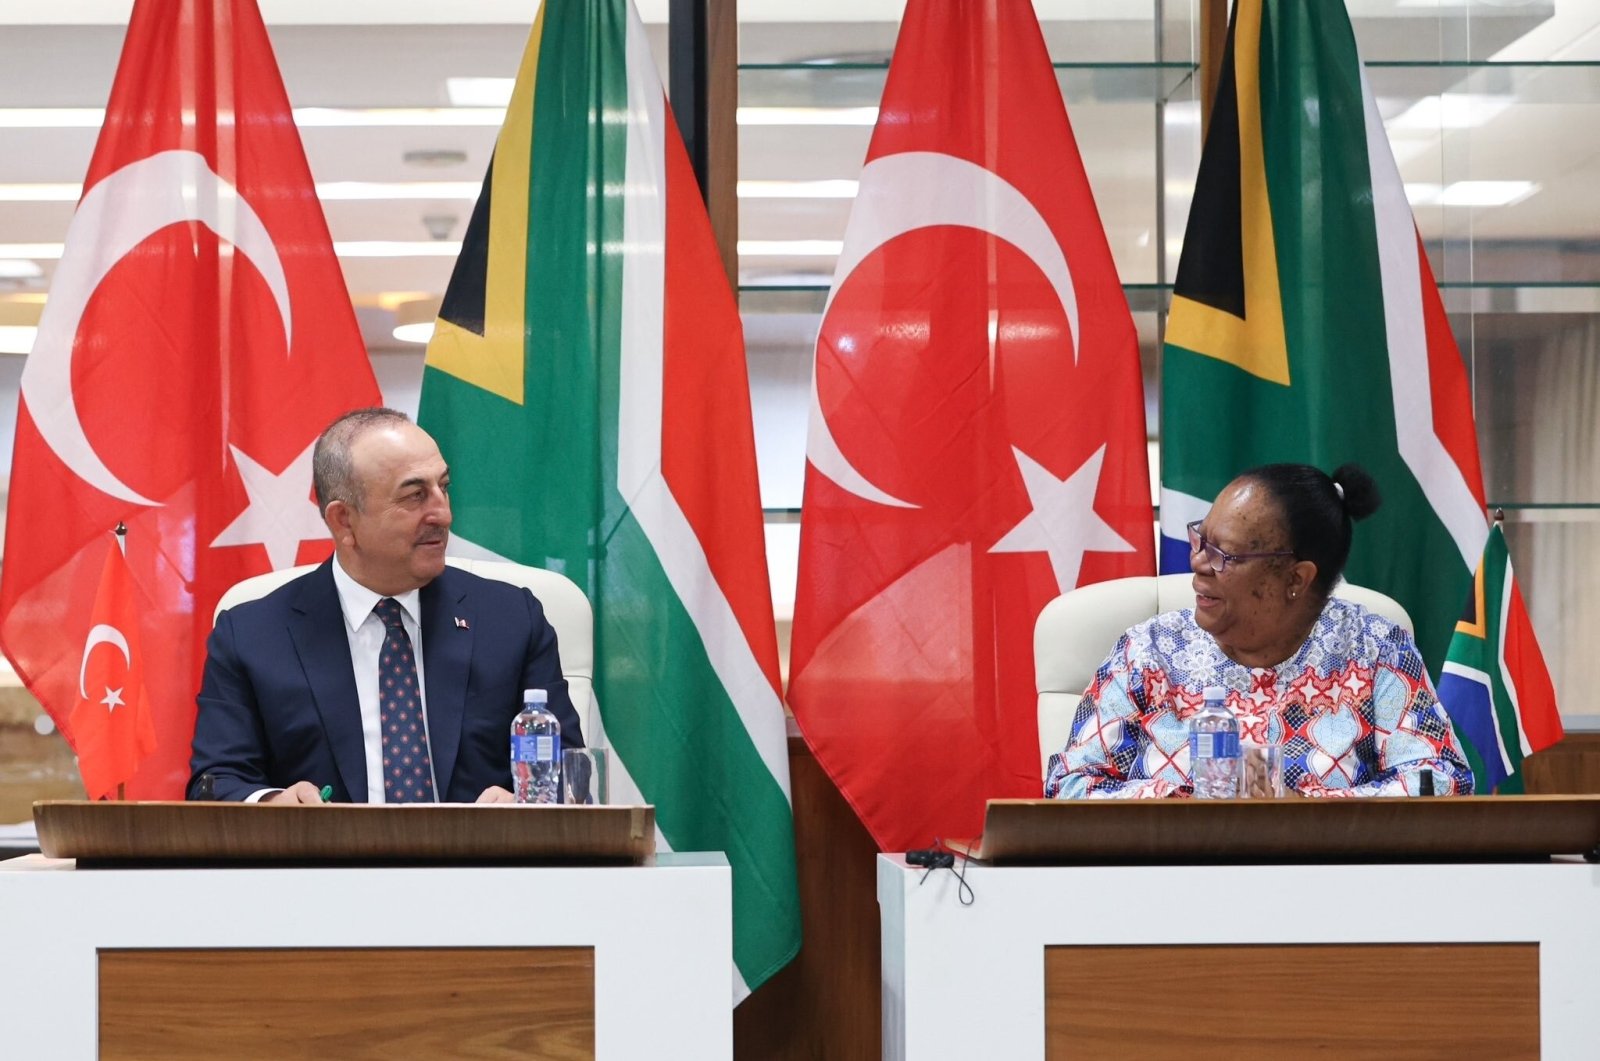 Foreign Minister Mevlüt Çavuşoğlu (L) conducts a joint press conference with South African Minister of International Relations and Cooperation Naledi Pandor (R), in Pretoria, South Africa, Jan. 10, 2023. (IHA Photo)